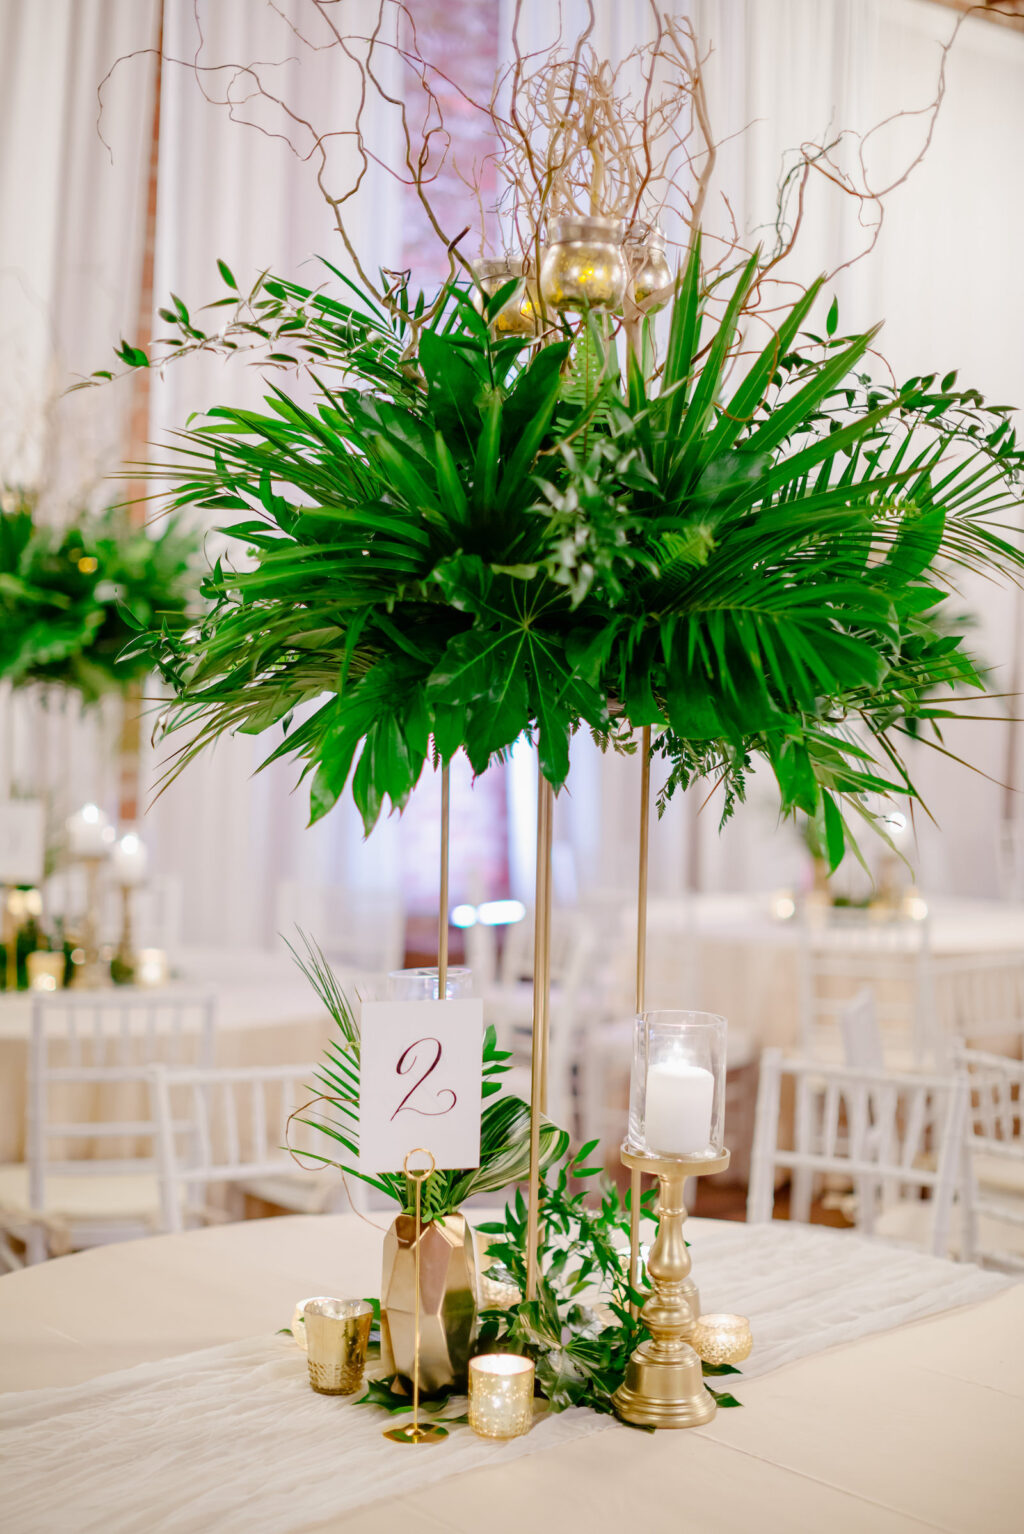 Tropical Elegant Florida Wedding Reception and Decor, Round Tables with Champagne Linens and Tall Centerpieces with Greenery and Palm Leafs, White Chiavari Chairs, Gold Candle Sticks and Pineapples